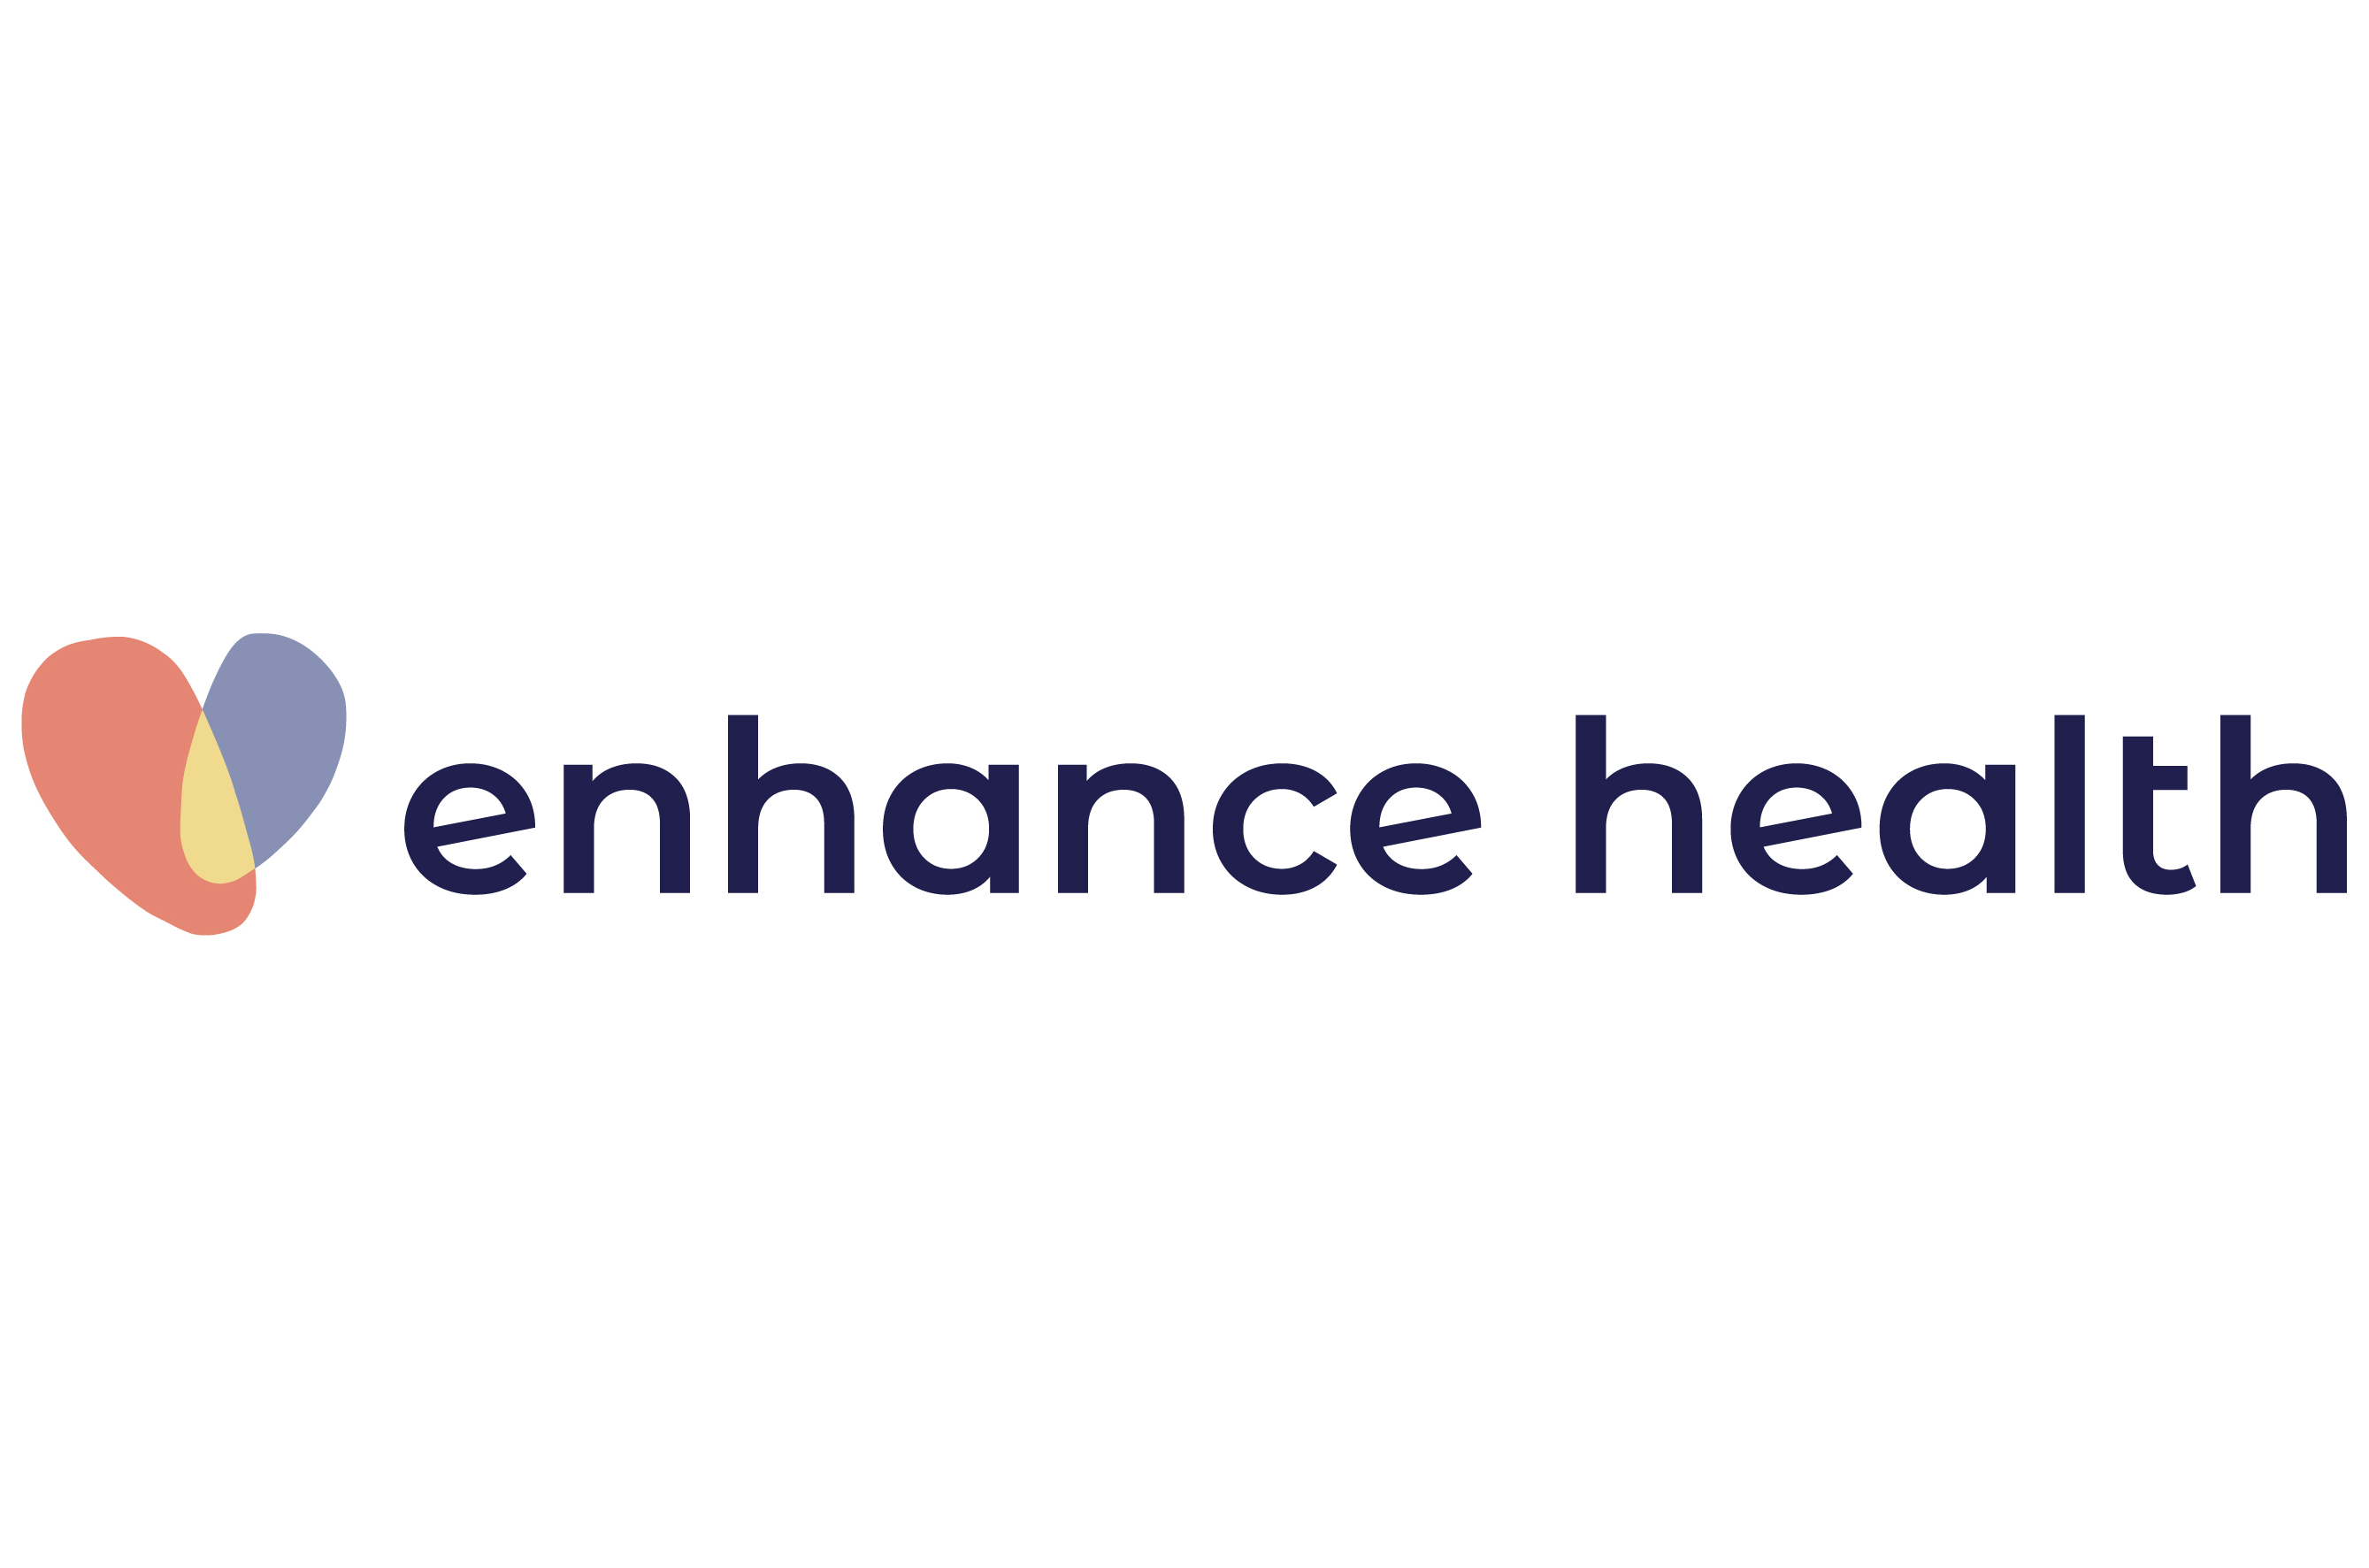 Enhance Health, New Digital Health Insurance Distribution and Care Navigation Platform, Launches with $150 Million of Capital;  Partners with Bain Capital Insurance to Build a Market Leader